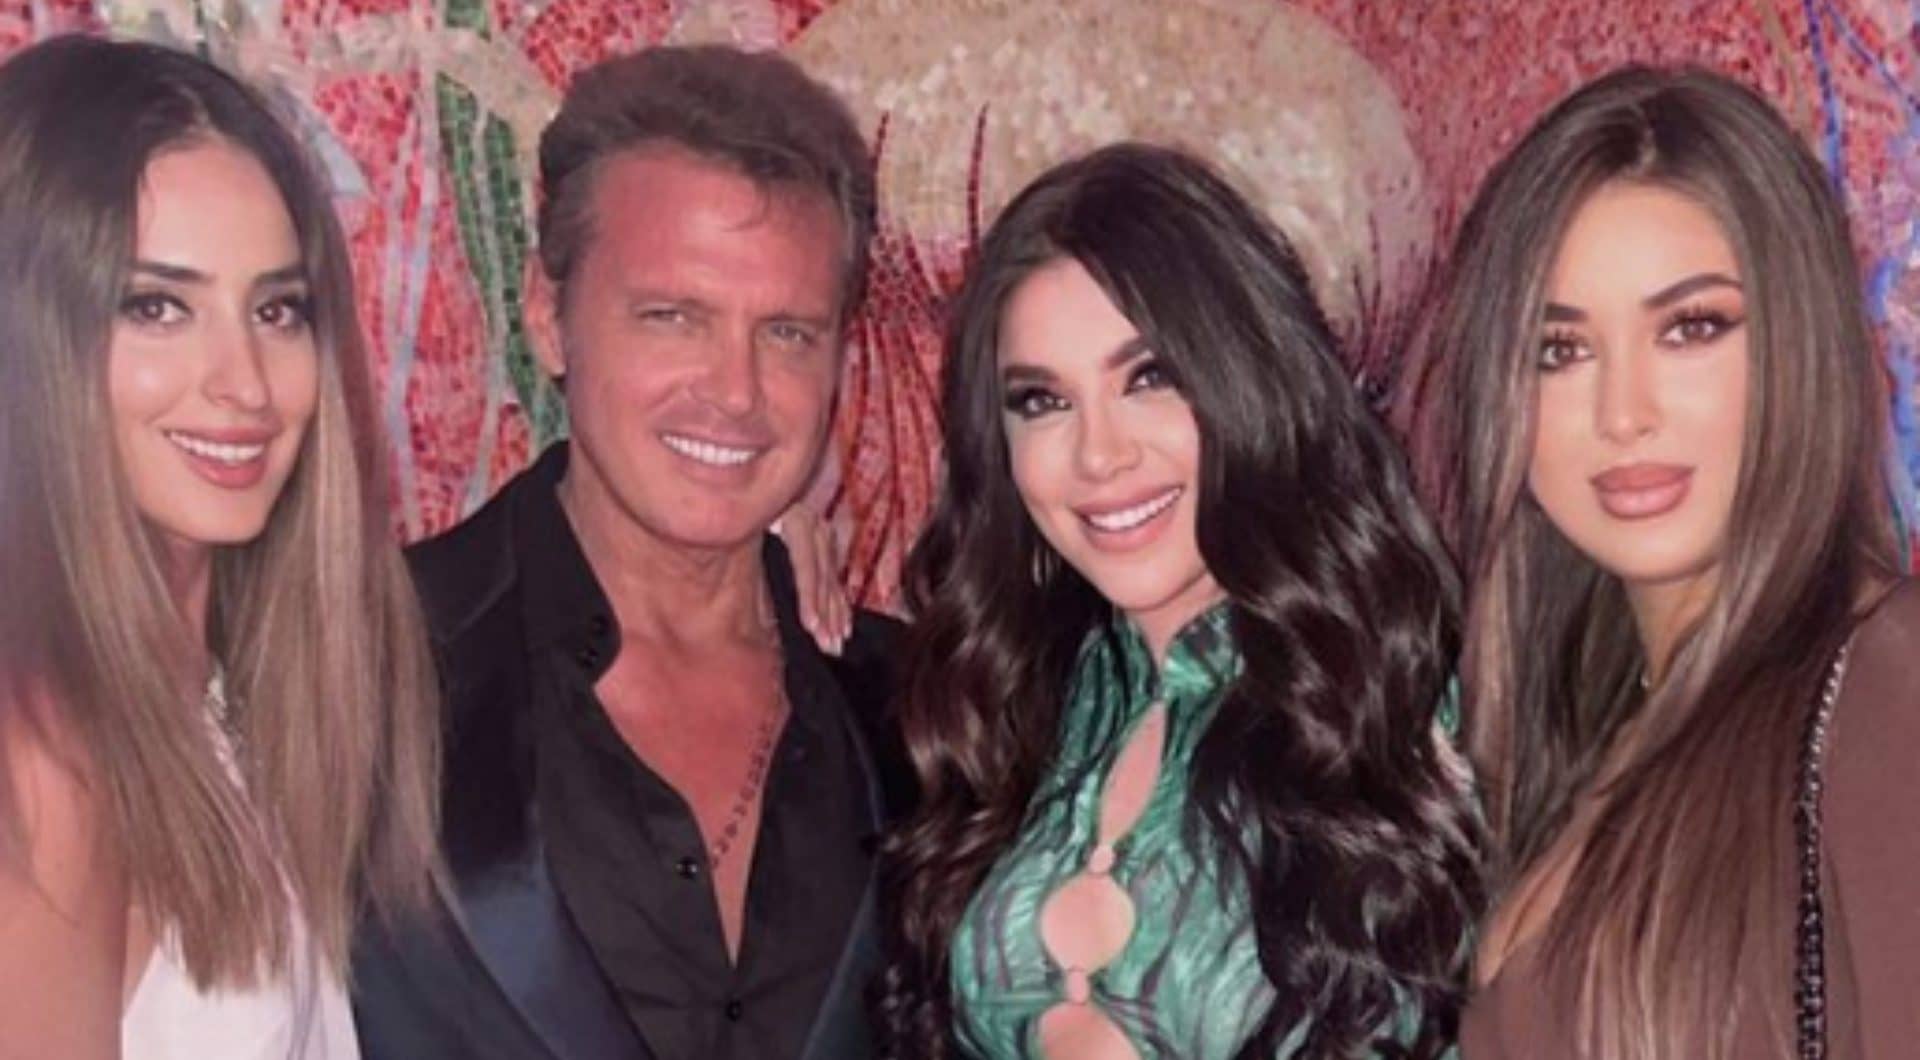 Artists and influencers Niza and beauties LaRache and Agatha Sencion celebrated the birthday they met Luis Miguel at an exclusive restaurant in Miami (Image: Instagram/agathasencion)